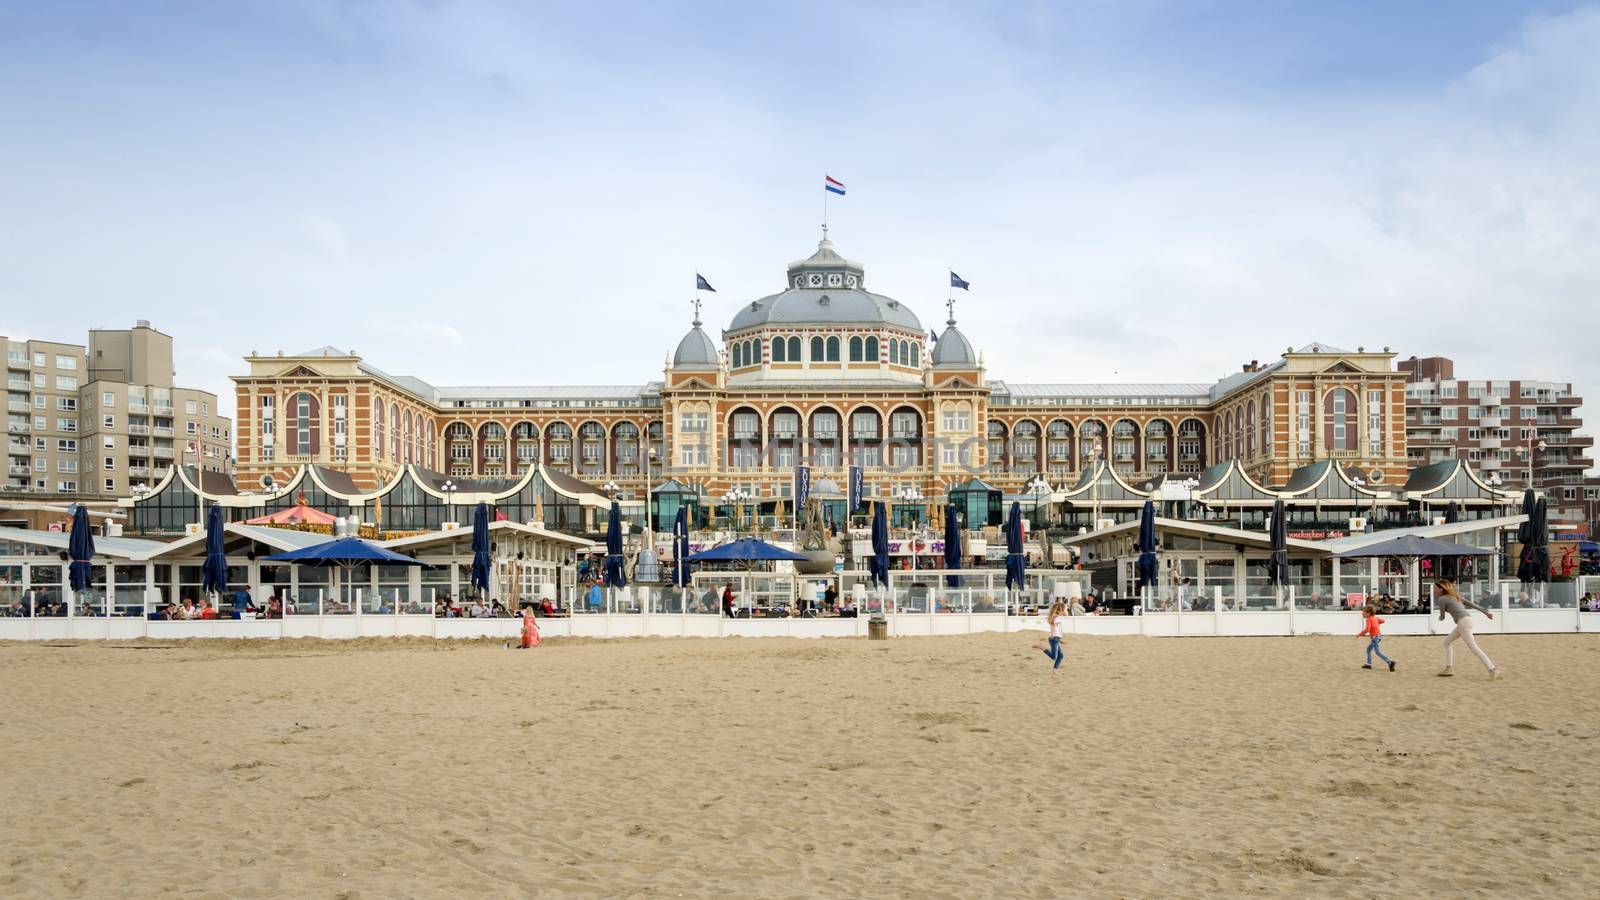 The Hague, Netherlands - May 8, 2015: Tourists at Kurhaus of Scheveningen, The Hague in the Netherlands is a hotel which is called the "Grand Hotel Amrath Kurhaus The Hague" since October 2014. It is located in the main seaside resort area, near the beach.